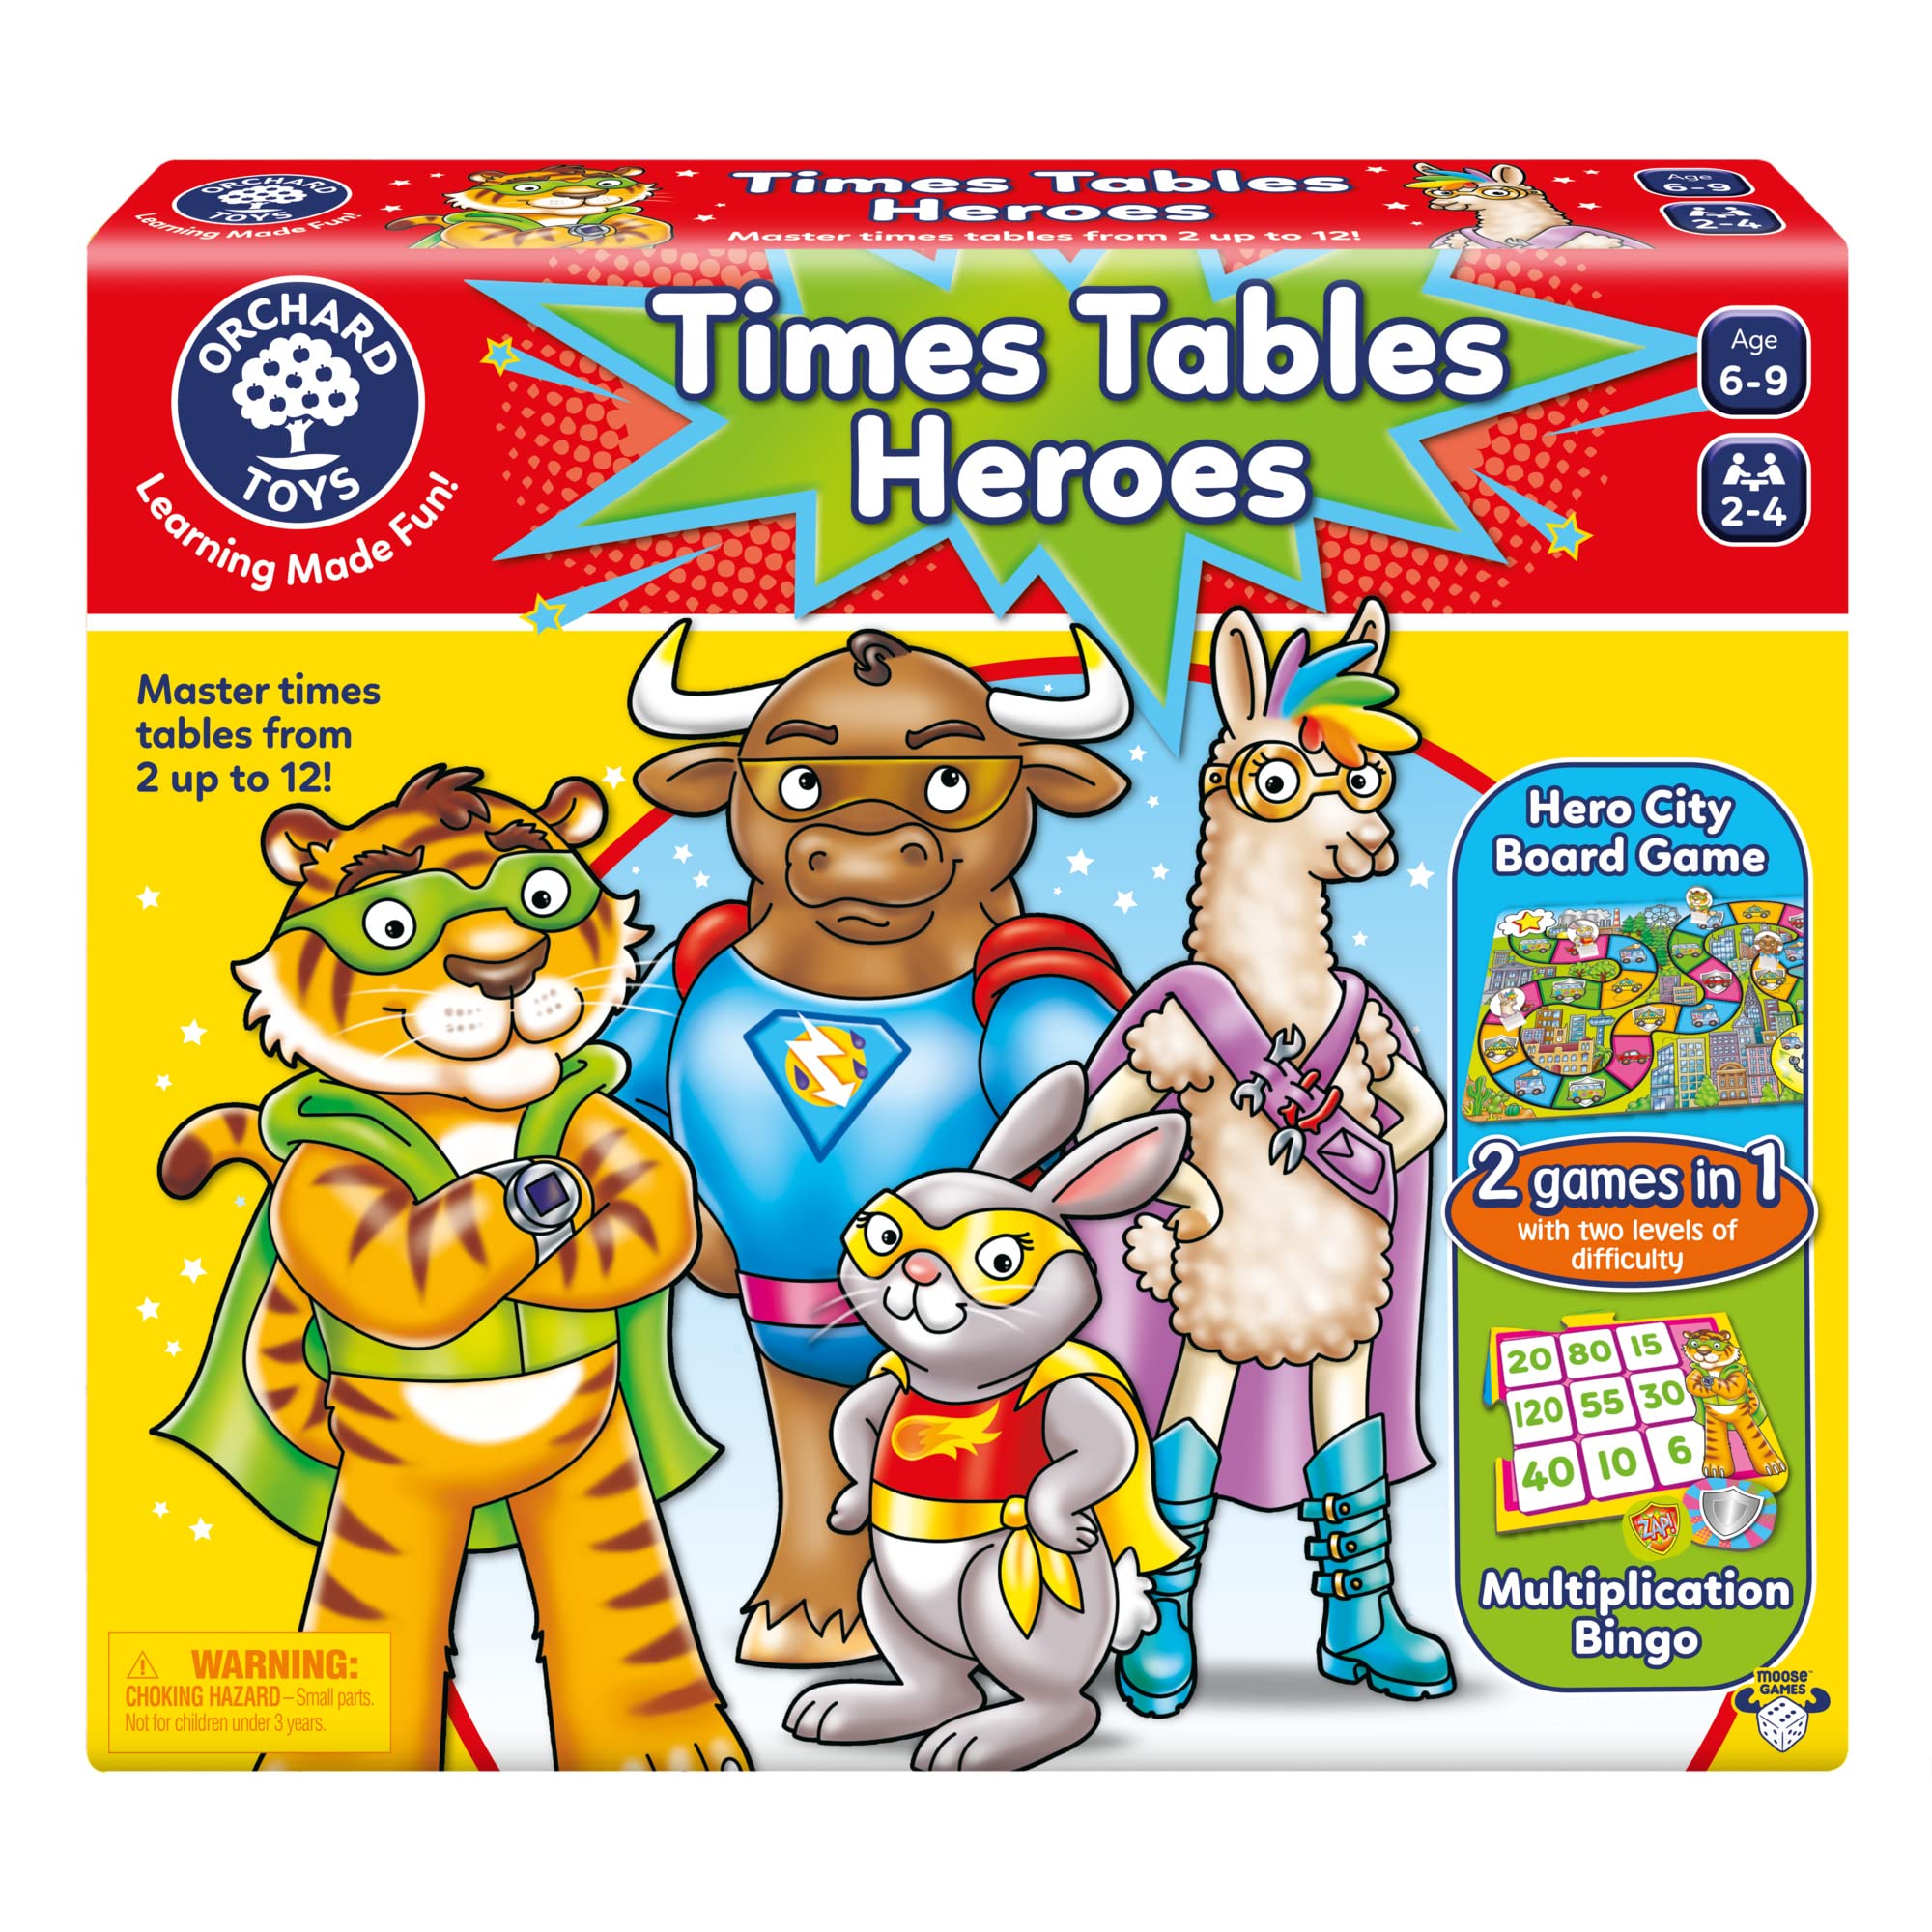 Orchard Toys Moose Games Times Tables Heroes. an exciting Multiplication Game , Superhero Play. for Ages 6-9 and for 2-4 Players